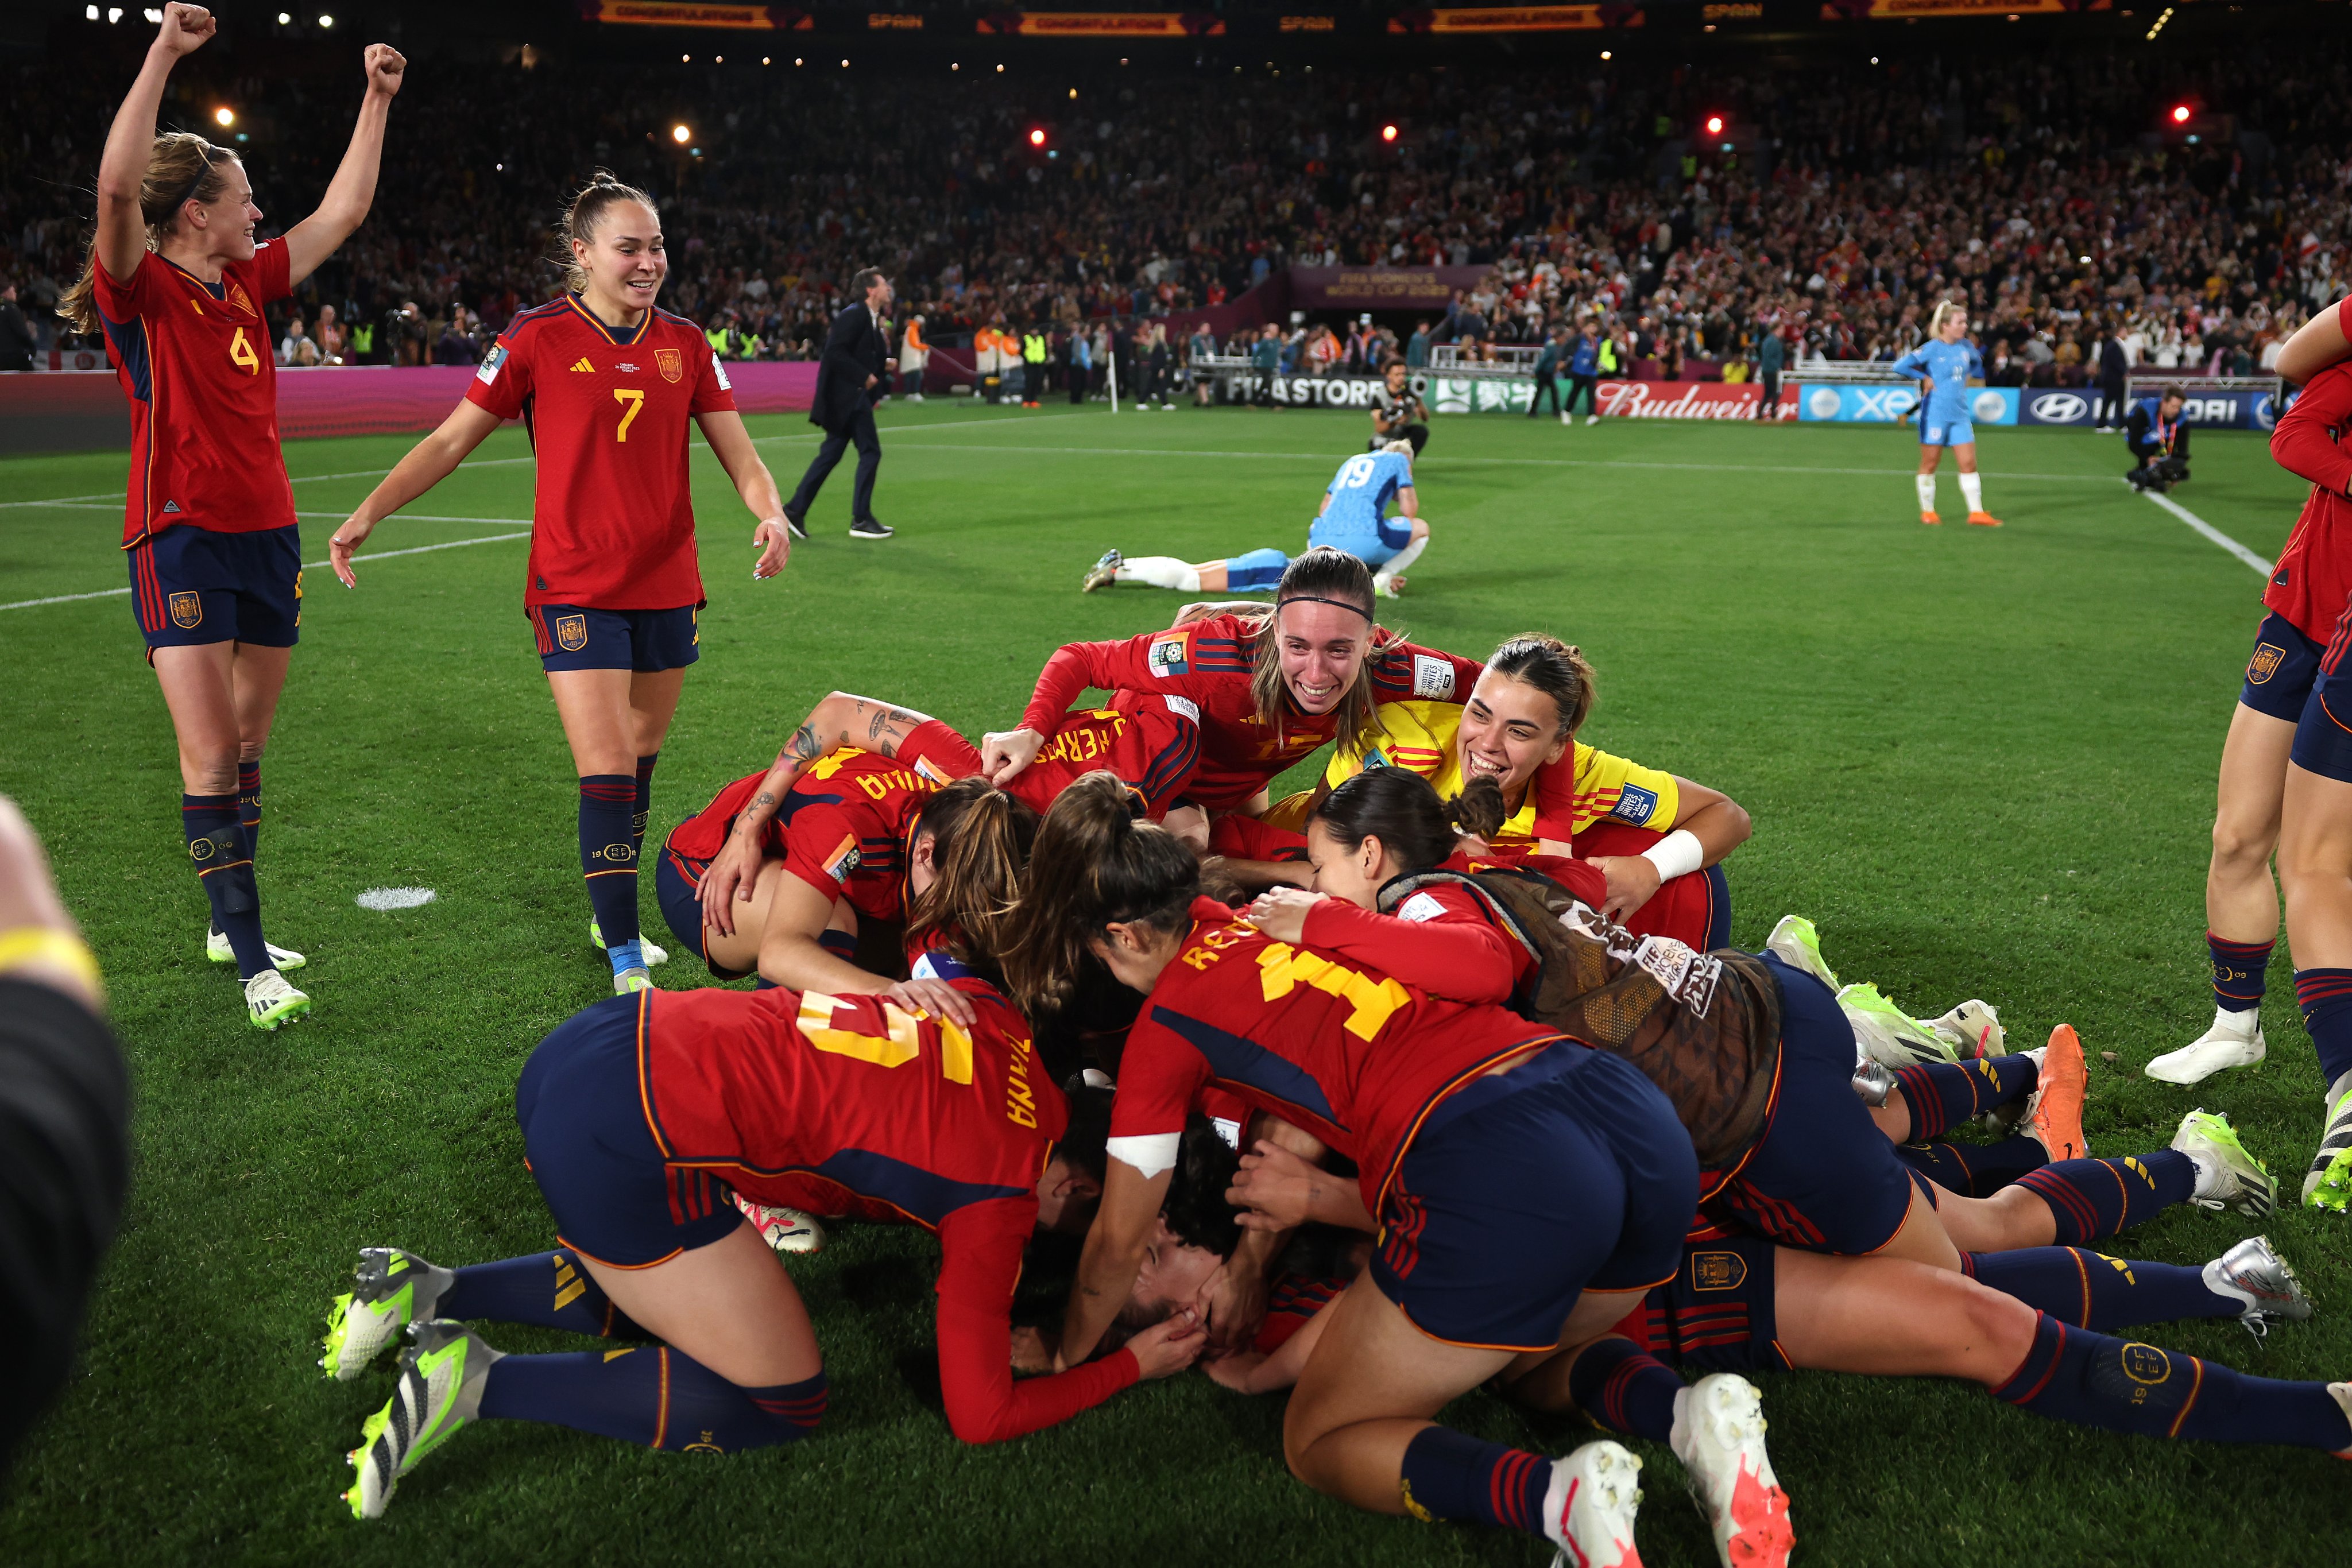 Spain's players huddle on the ground in celebration after winning the FIFA Women's World Cup